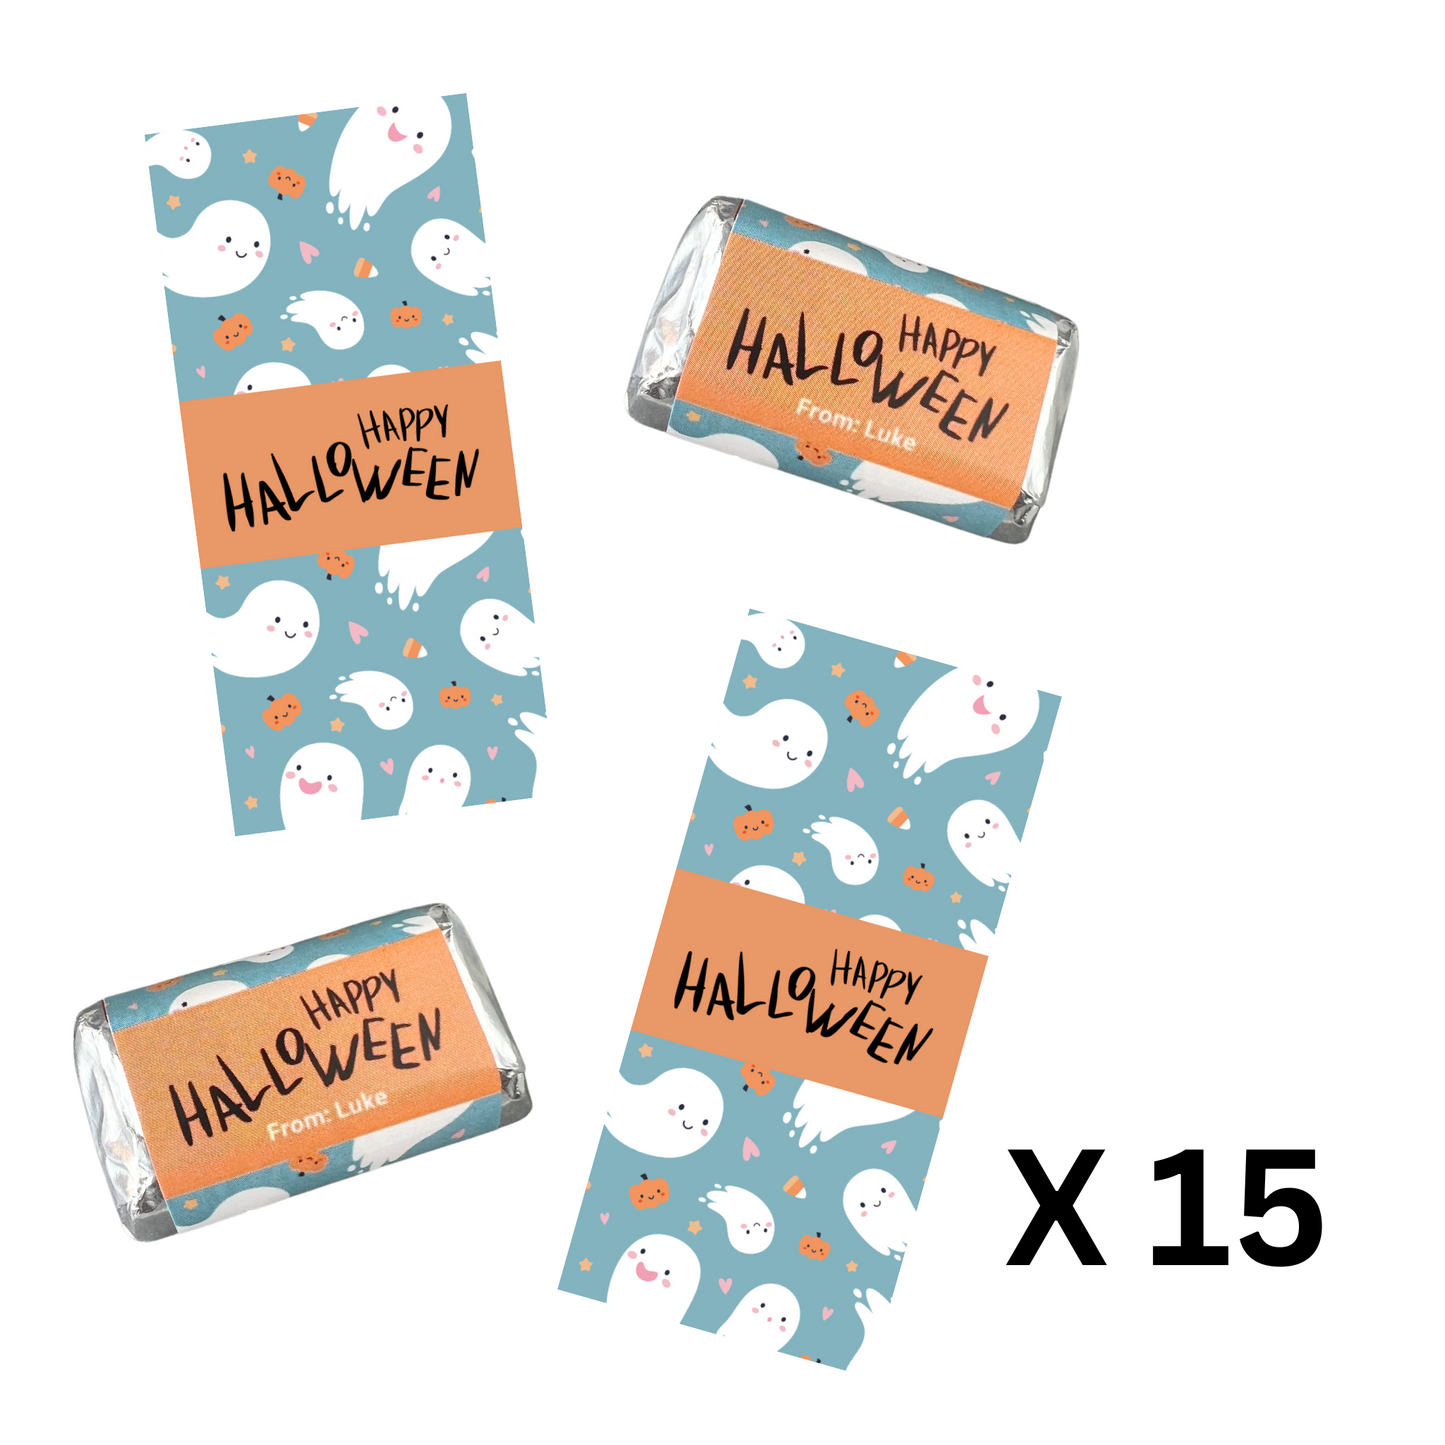 Halloween mini Hershey's candy wrappers x 15